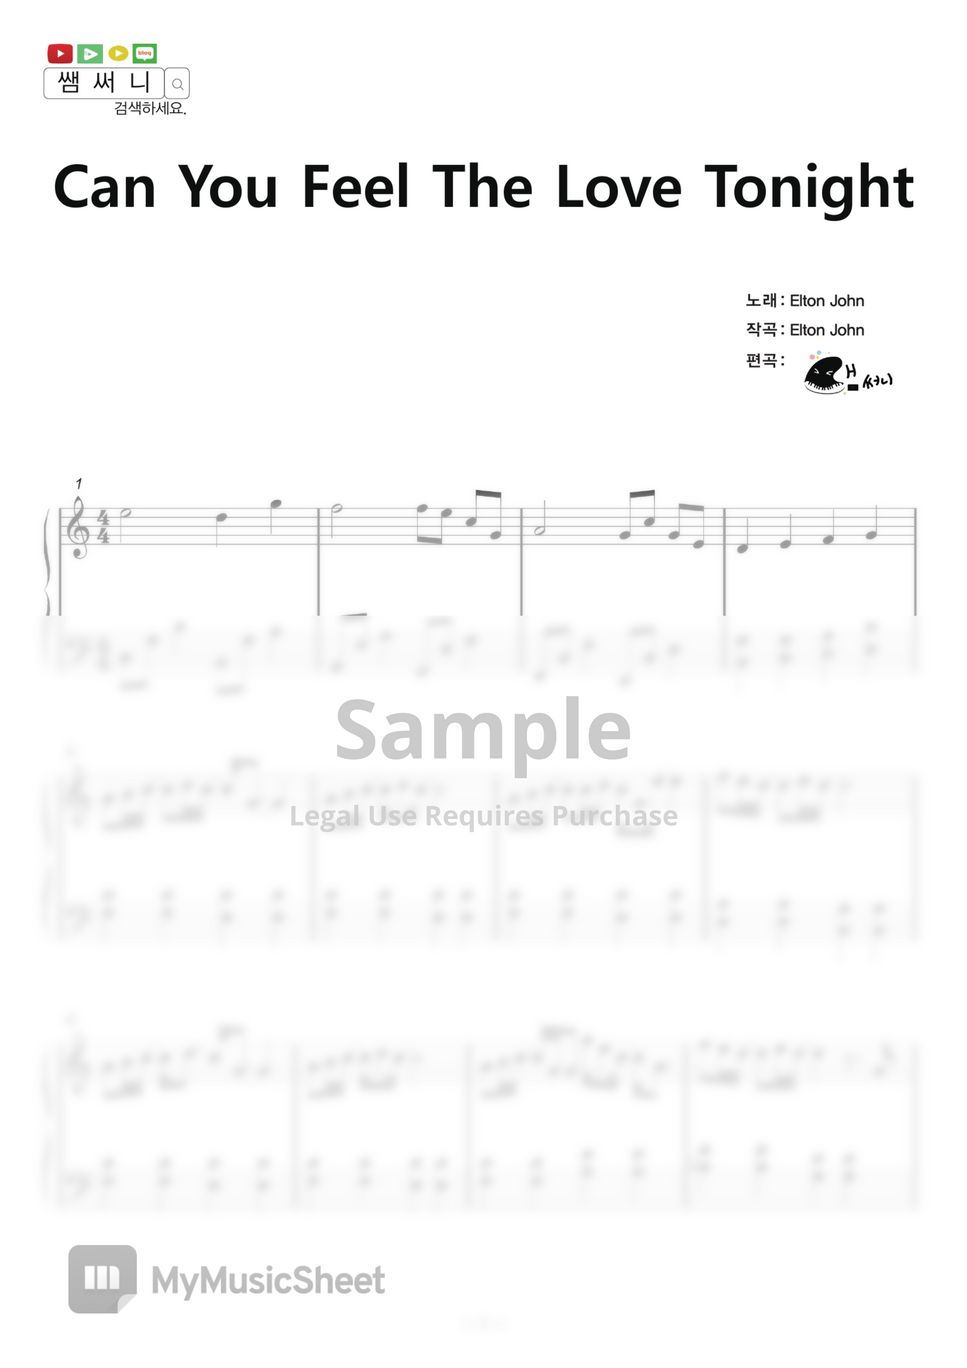 The Lion King - Can You Feel the Love Tonightㅣ Easy piano cover by samsunny